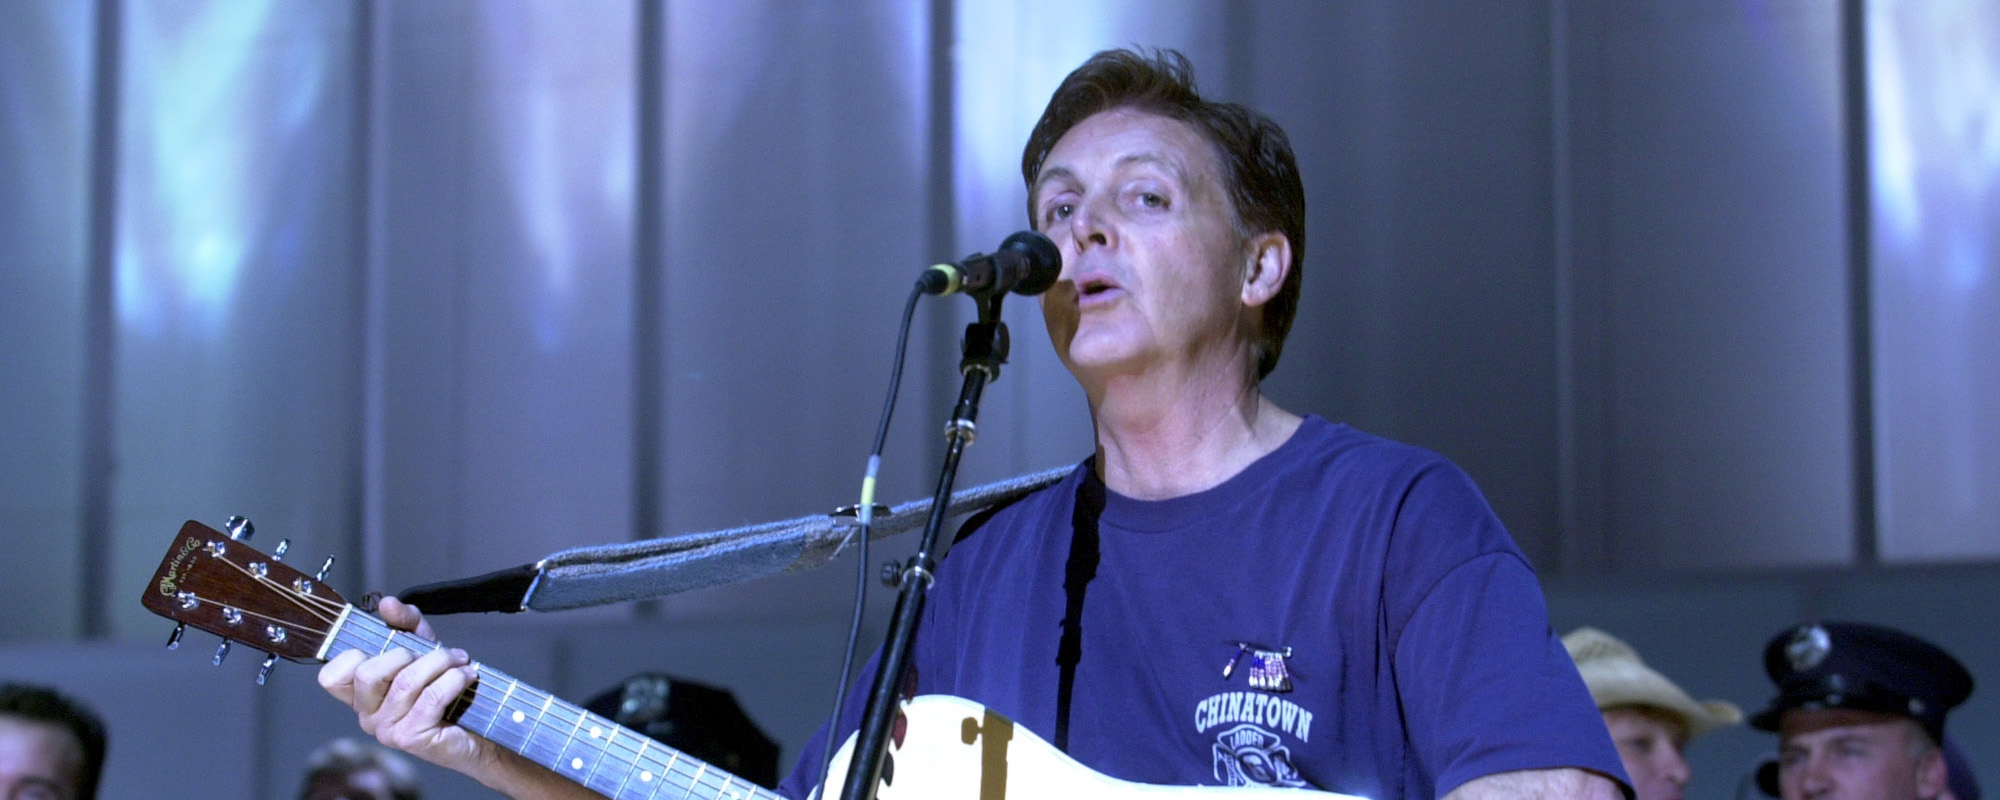 Paul McCartney’s 5 Most Heartfelt Songs About Love and Relationships